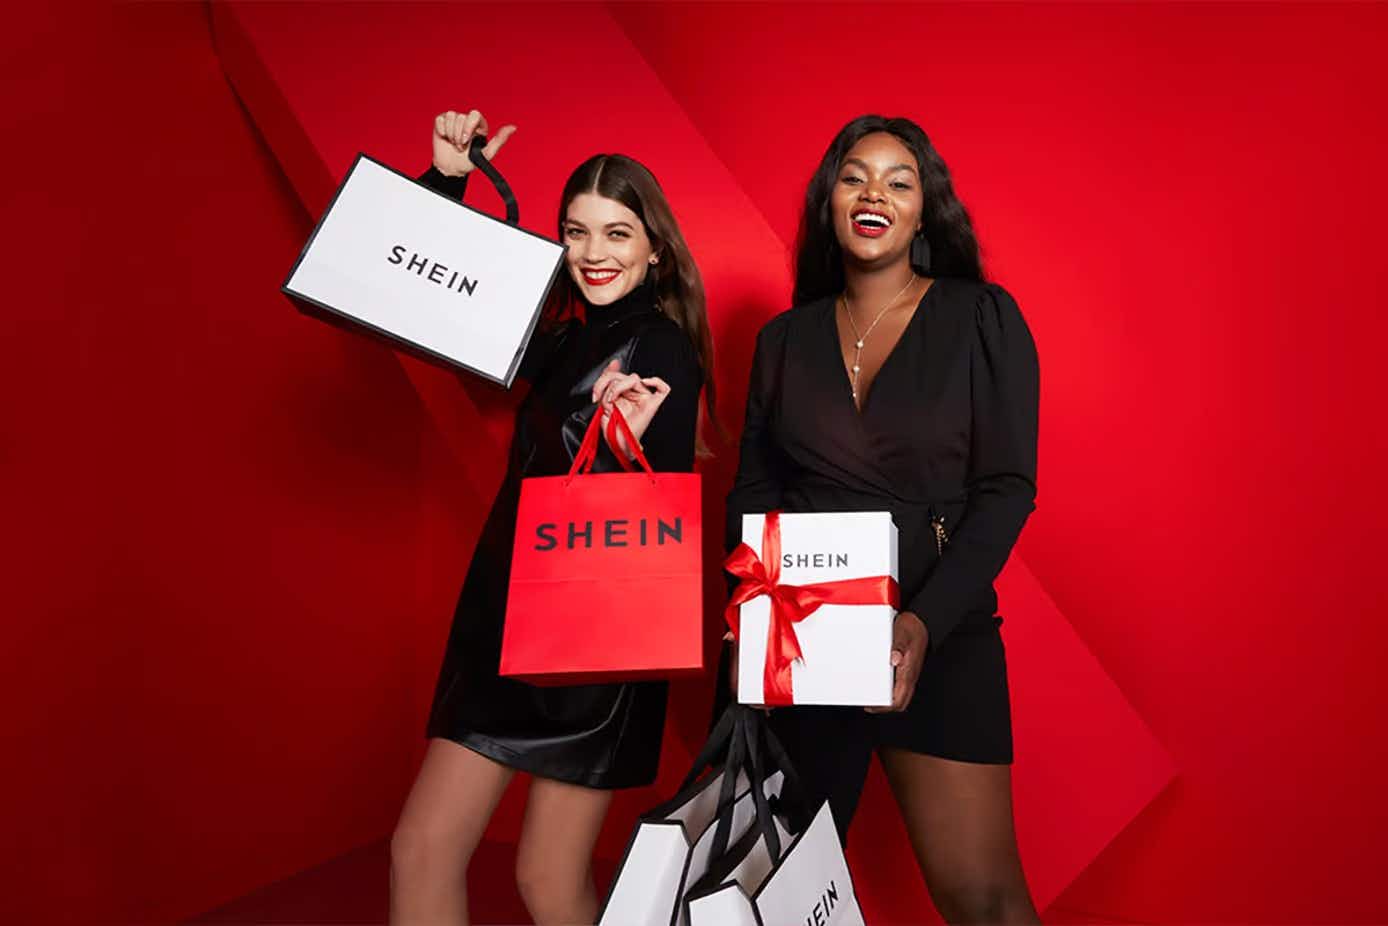 two people posing with Shein bags